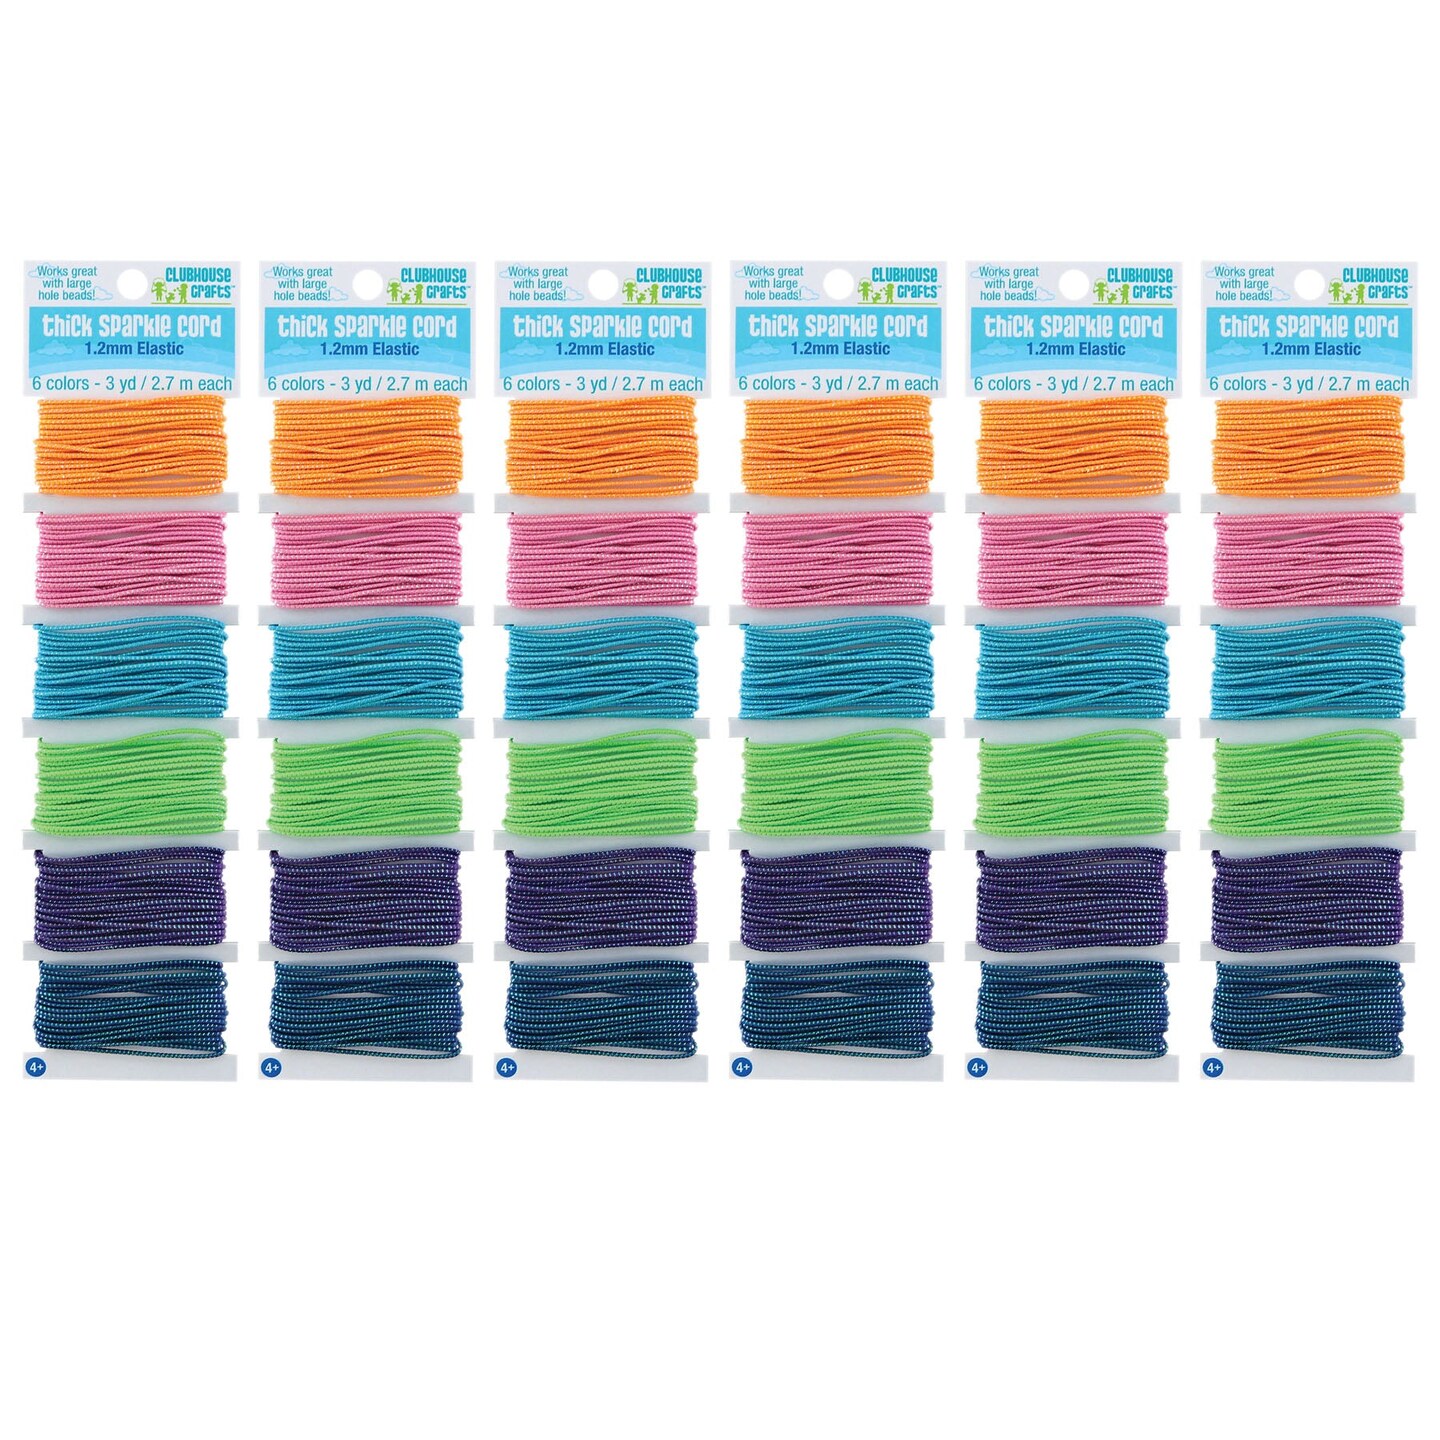 Colorful Thick Elastic Cord, 18 Yards - 6 Sparkle Assorted Colors